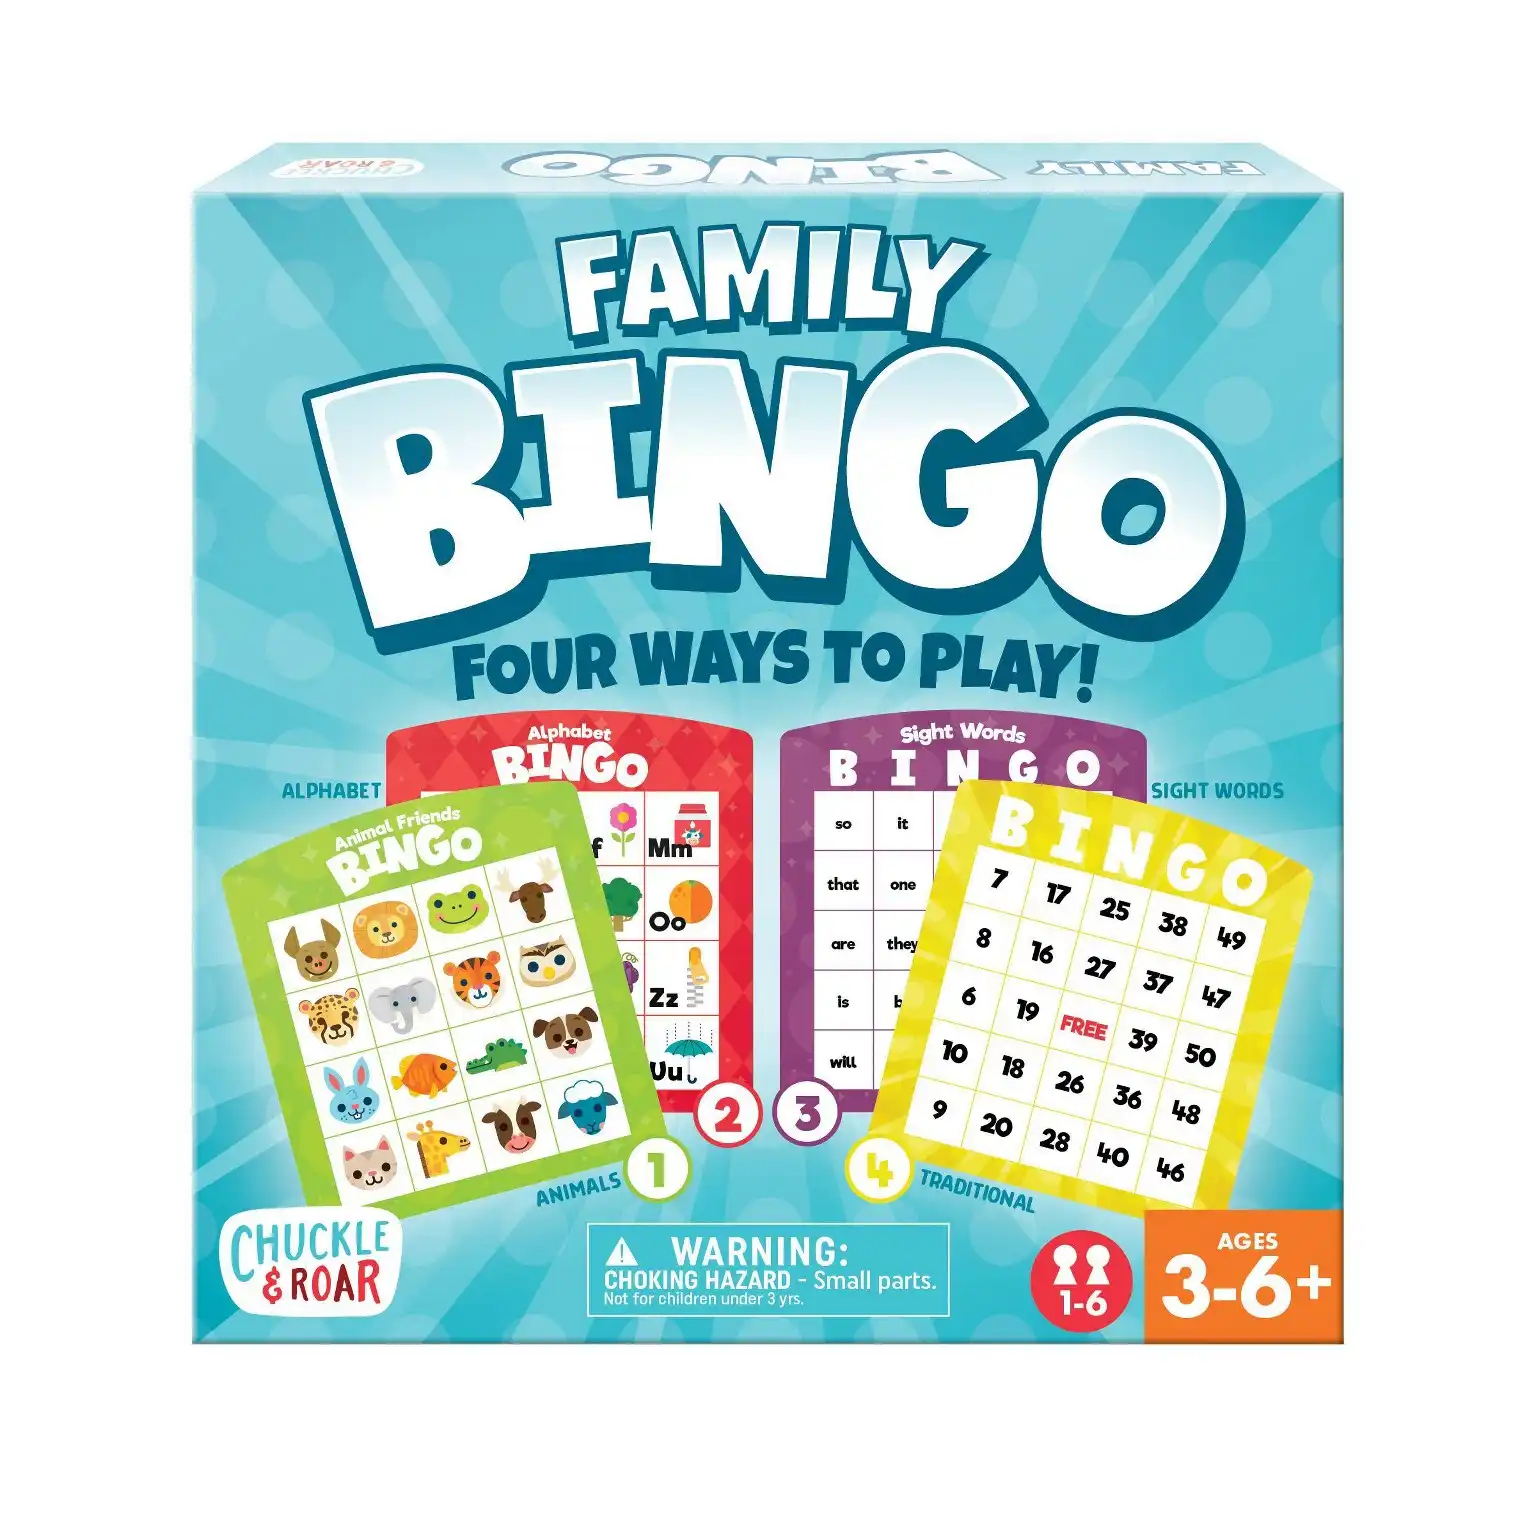 Chuckle & Roar - Family Bingo - Game Night Staple - Counting and Matching Skills for Kids - Classic Game Perfect for preschoolers